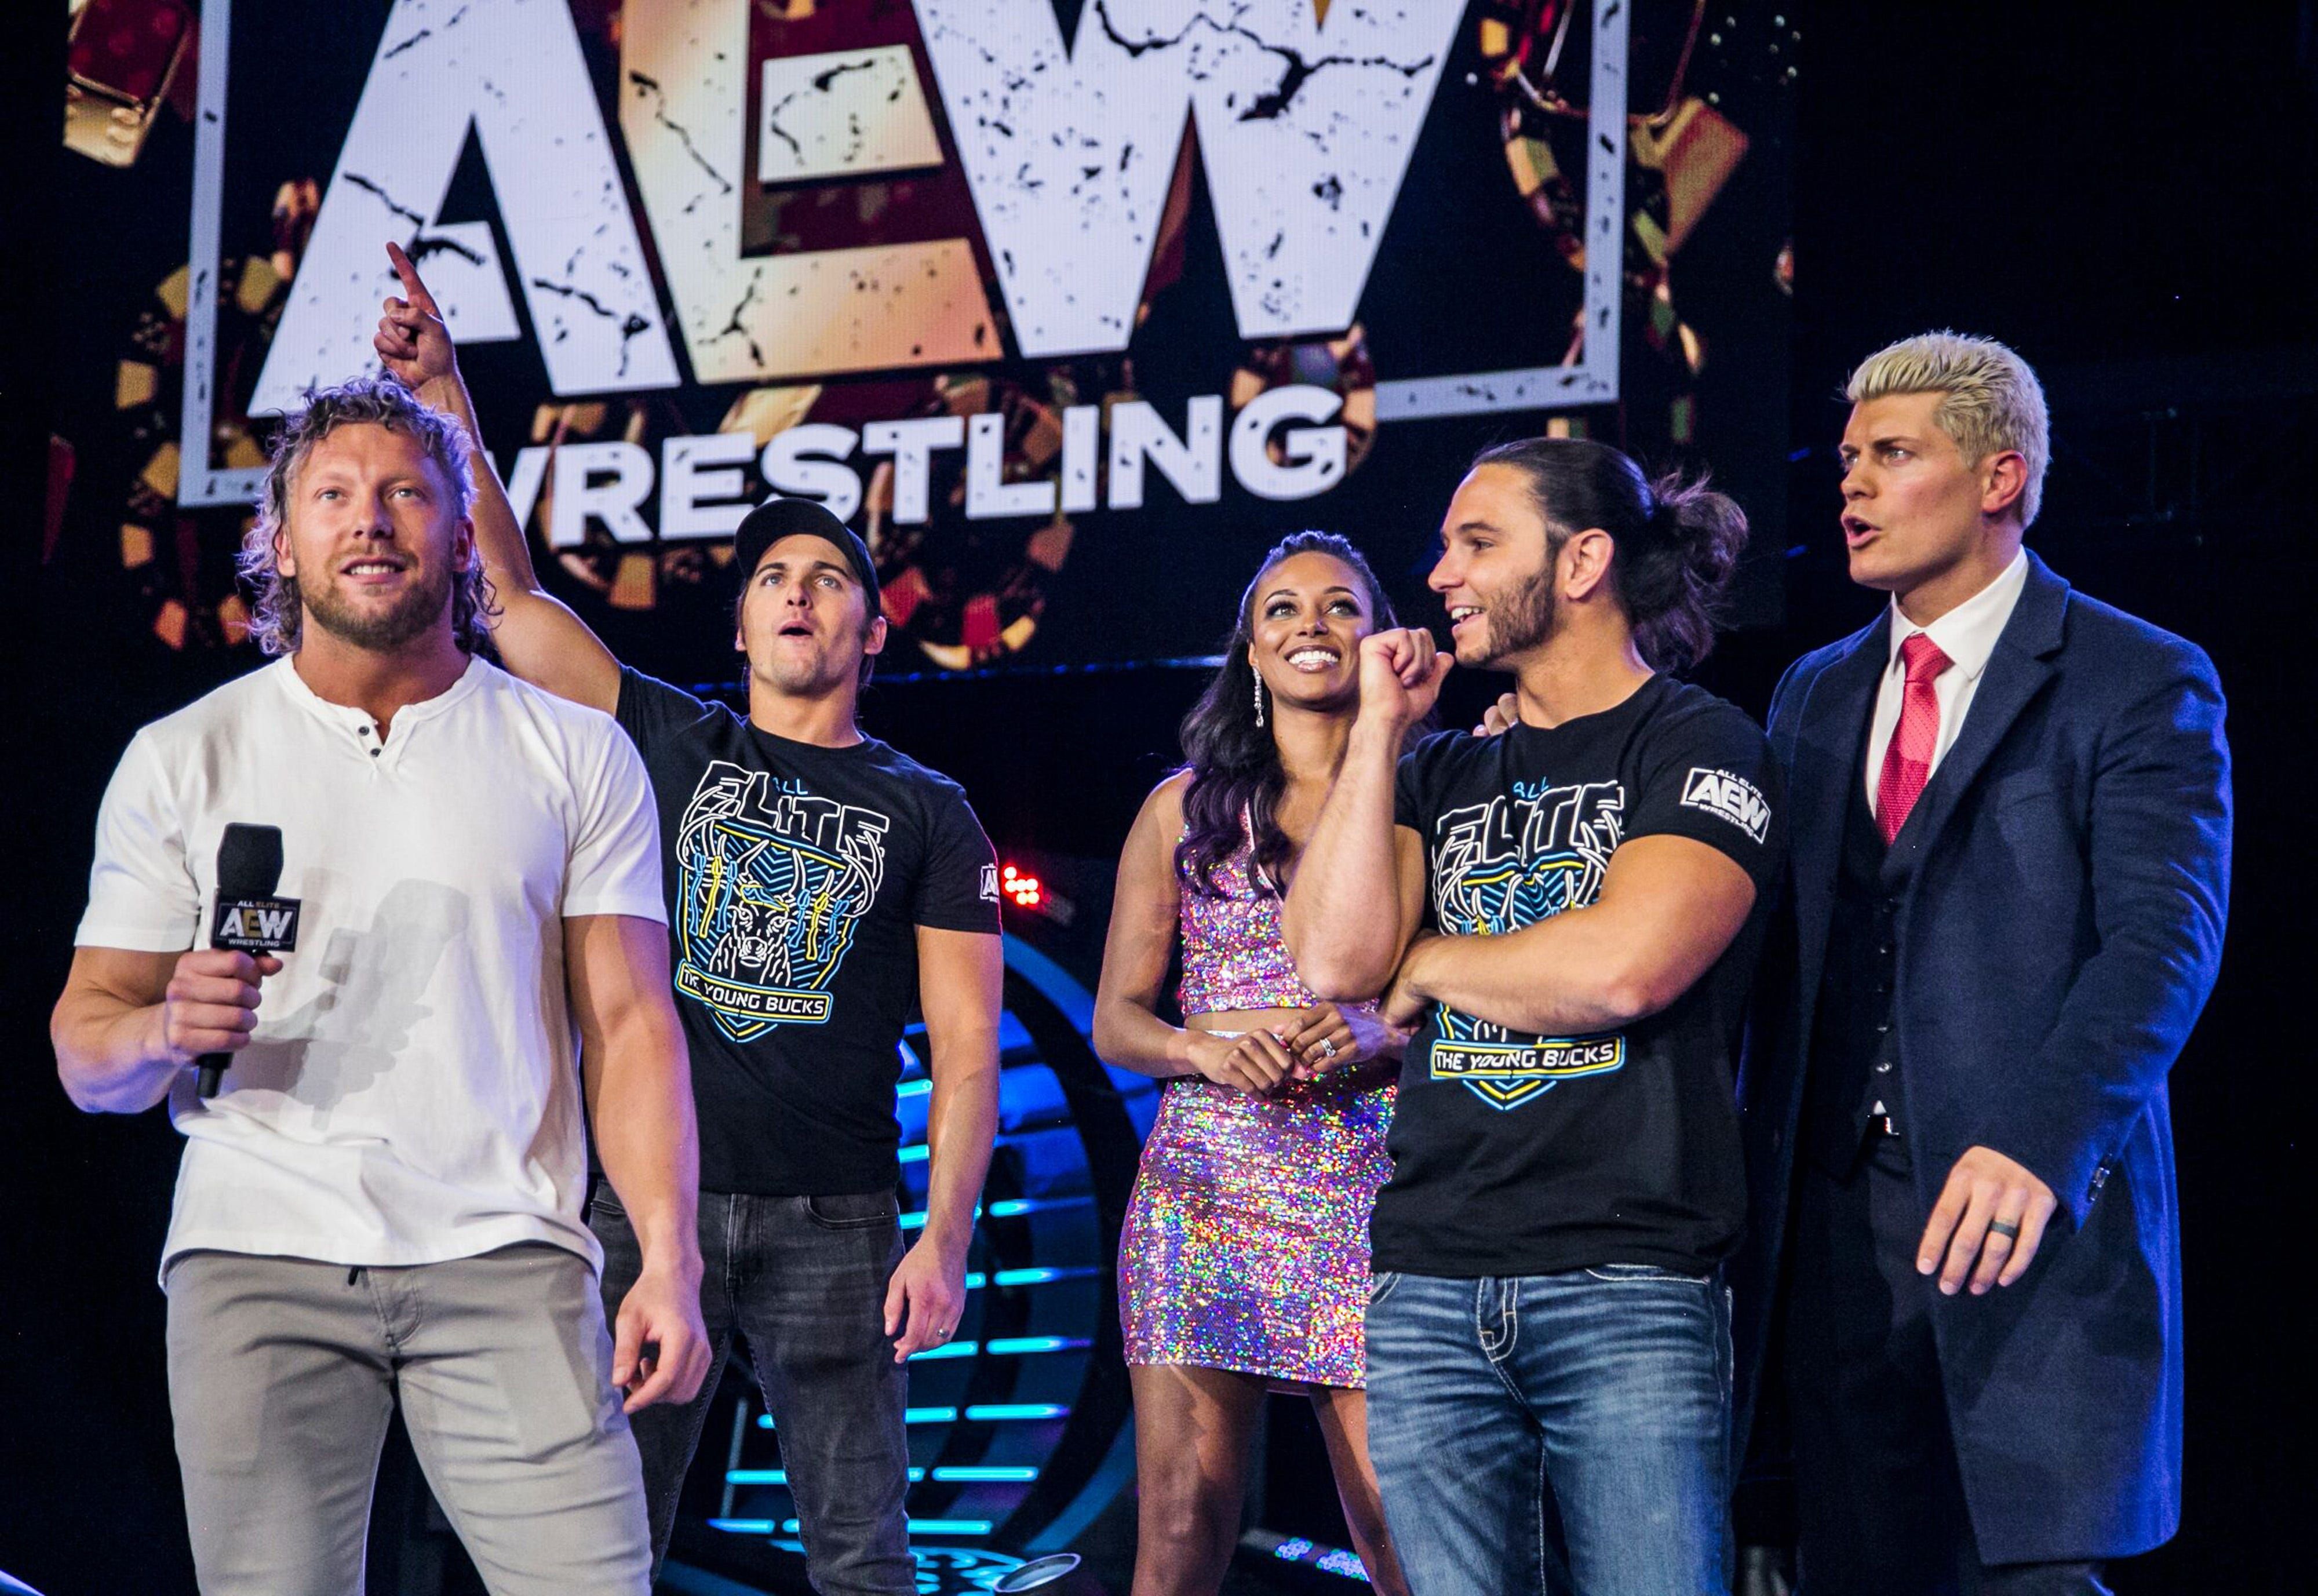 AEW Founders: Kenny Omega, The Young Bucks, Cody and Brandi Rhodes